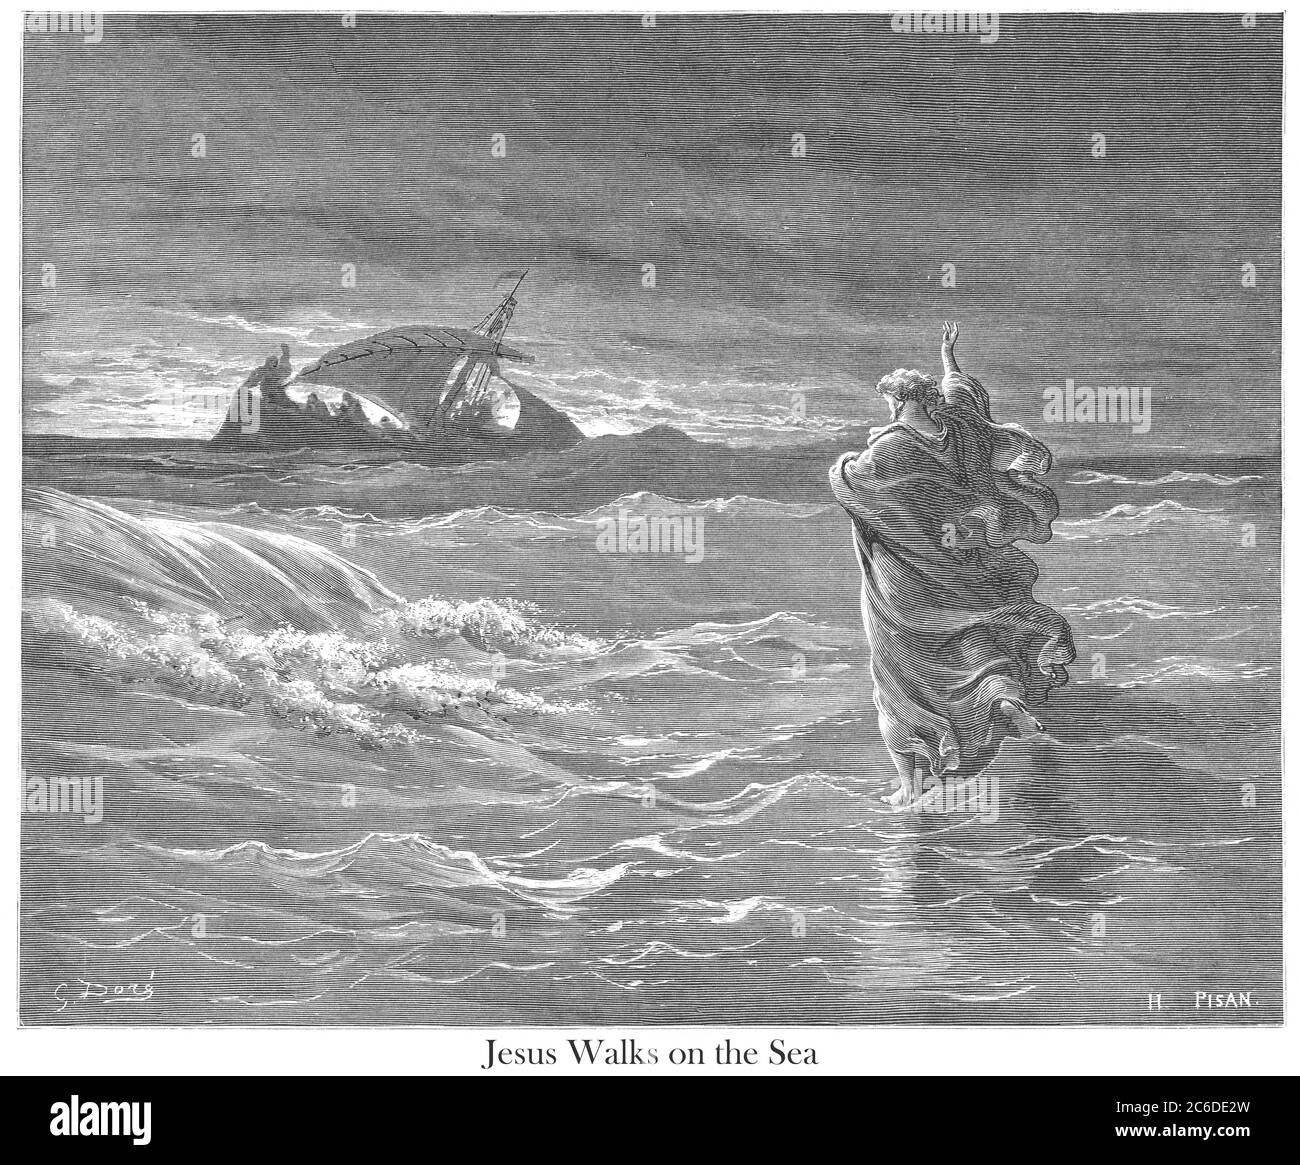 Jesus Walking on the Sea [John 6:19-20] From the book 'Bible Gallery' Illustrated by Gustave Dore with Memoir of Dore and Descriptive Letter-press by Talbot W. Chambers D.D. Published by Cassell & Company Limited in London and simultaneously by Mame in Tours, France in 1866 Stock Photo